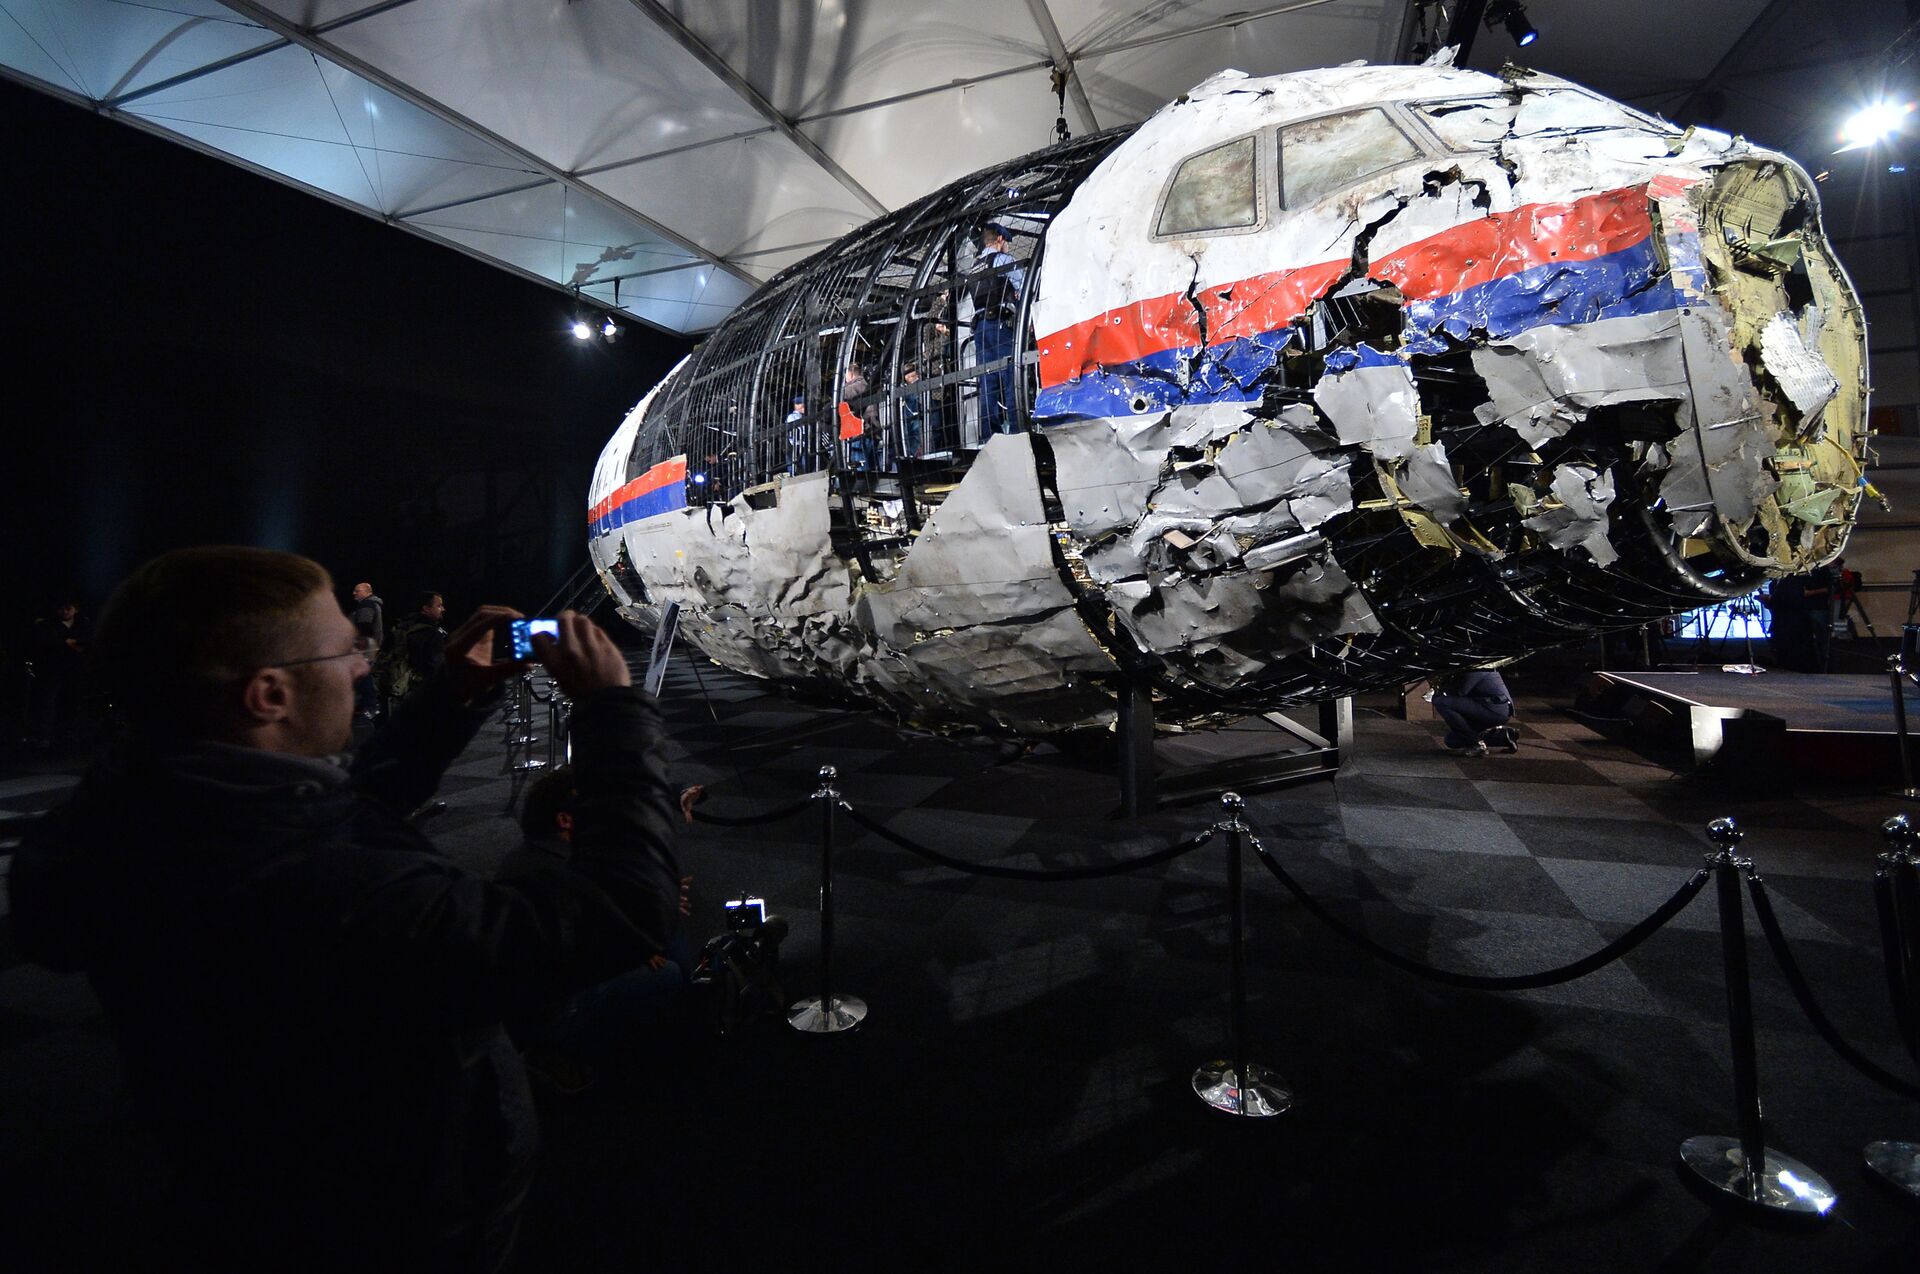 Netherlands May Look Into Ukraine's Role in MH17 Crash as Hearings Continue  - Sputnik International, 1920, 25.06.2021